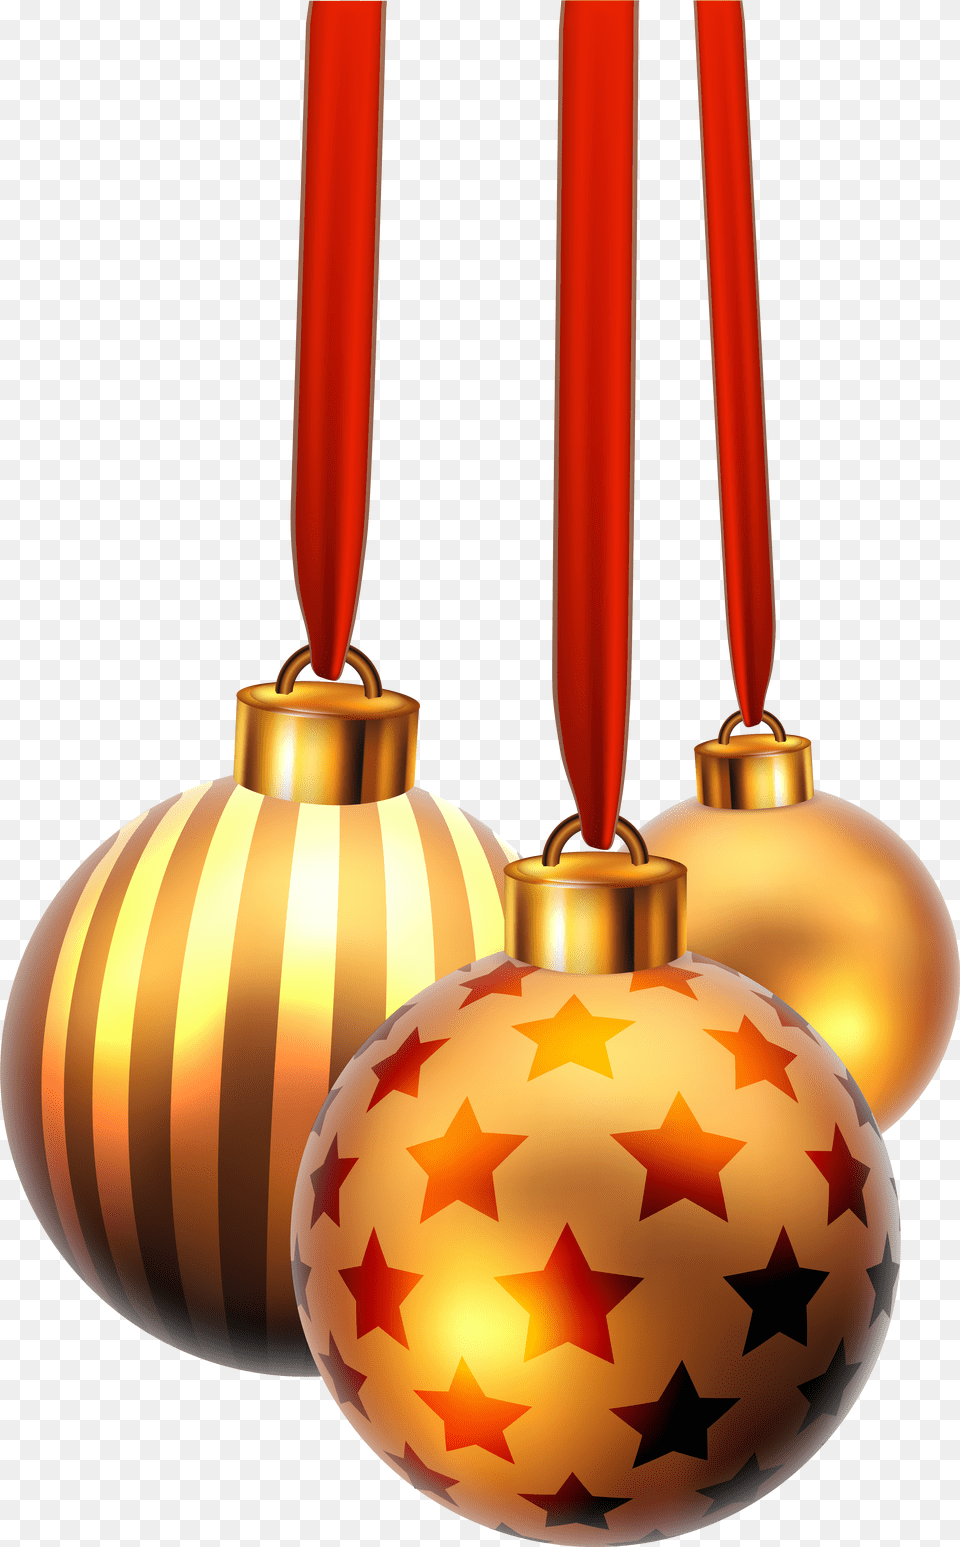 Hanging Christmas Ornaments Xmas Balls, Gold, Lighting, Accessories, Ornament Png